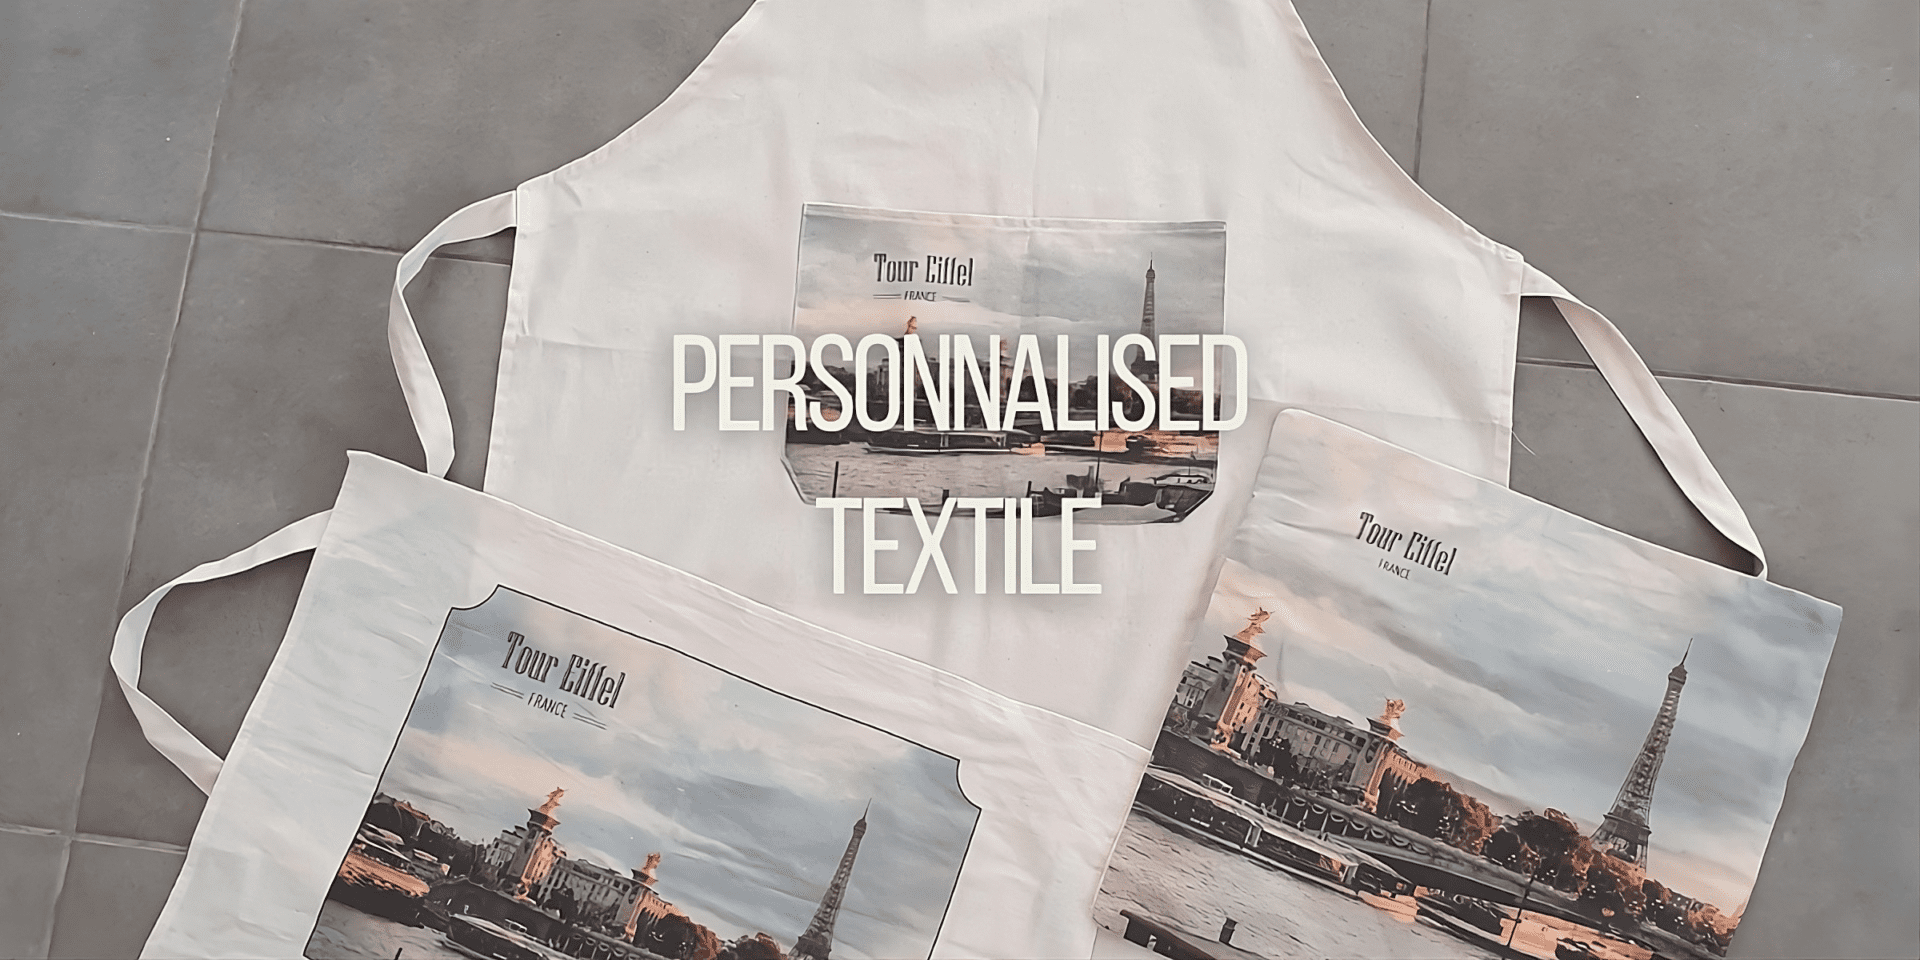 Products in the Personalised Textile range from Wasteless Group